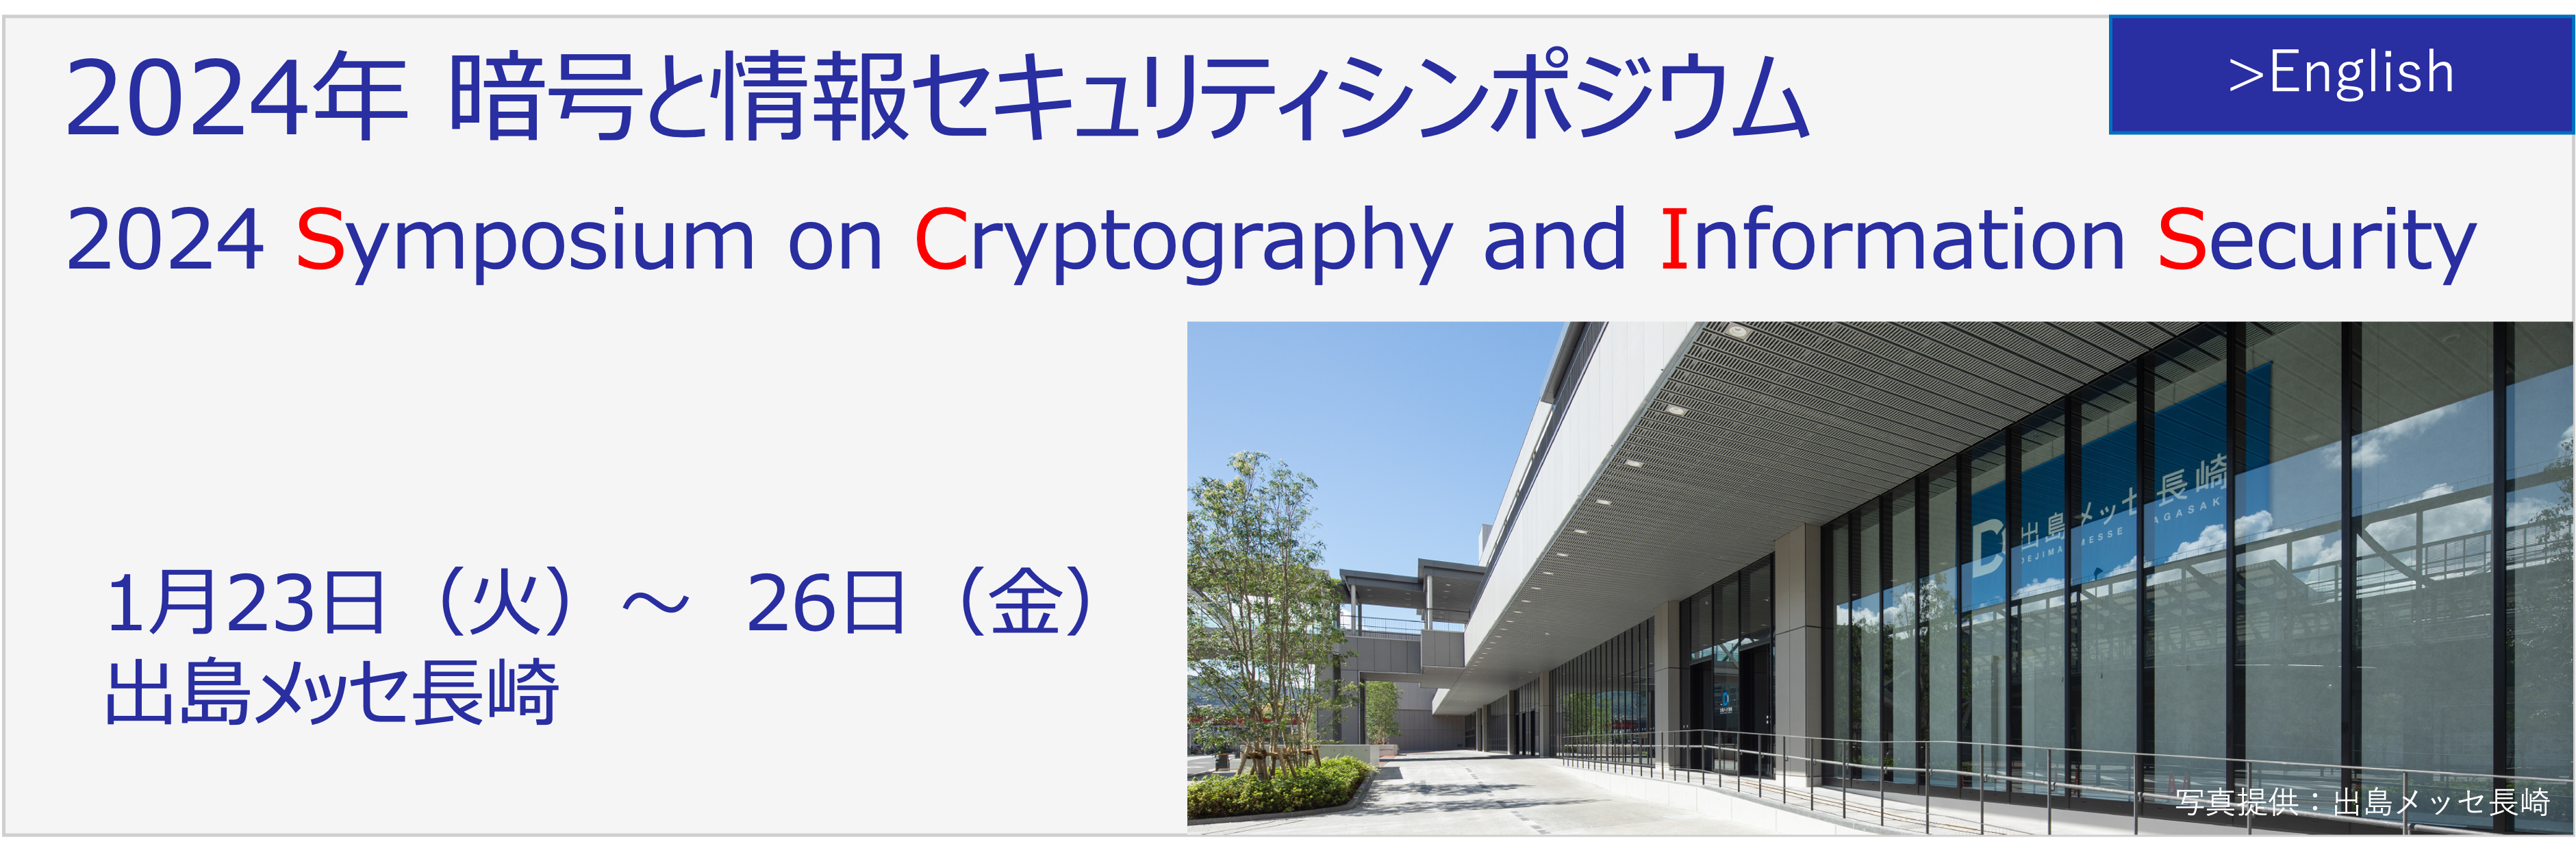 SCIS2024　2024 Symposium on Cryptography and Information Security